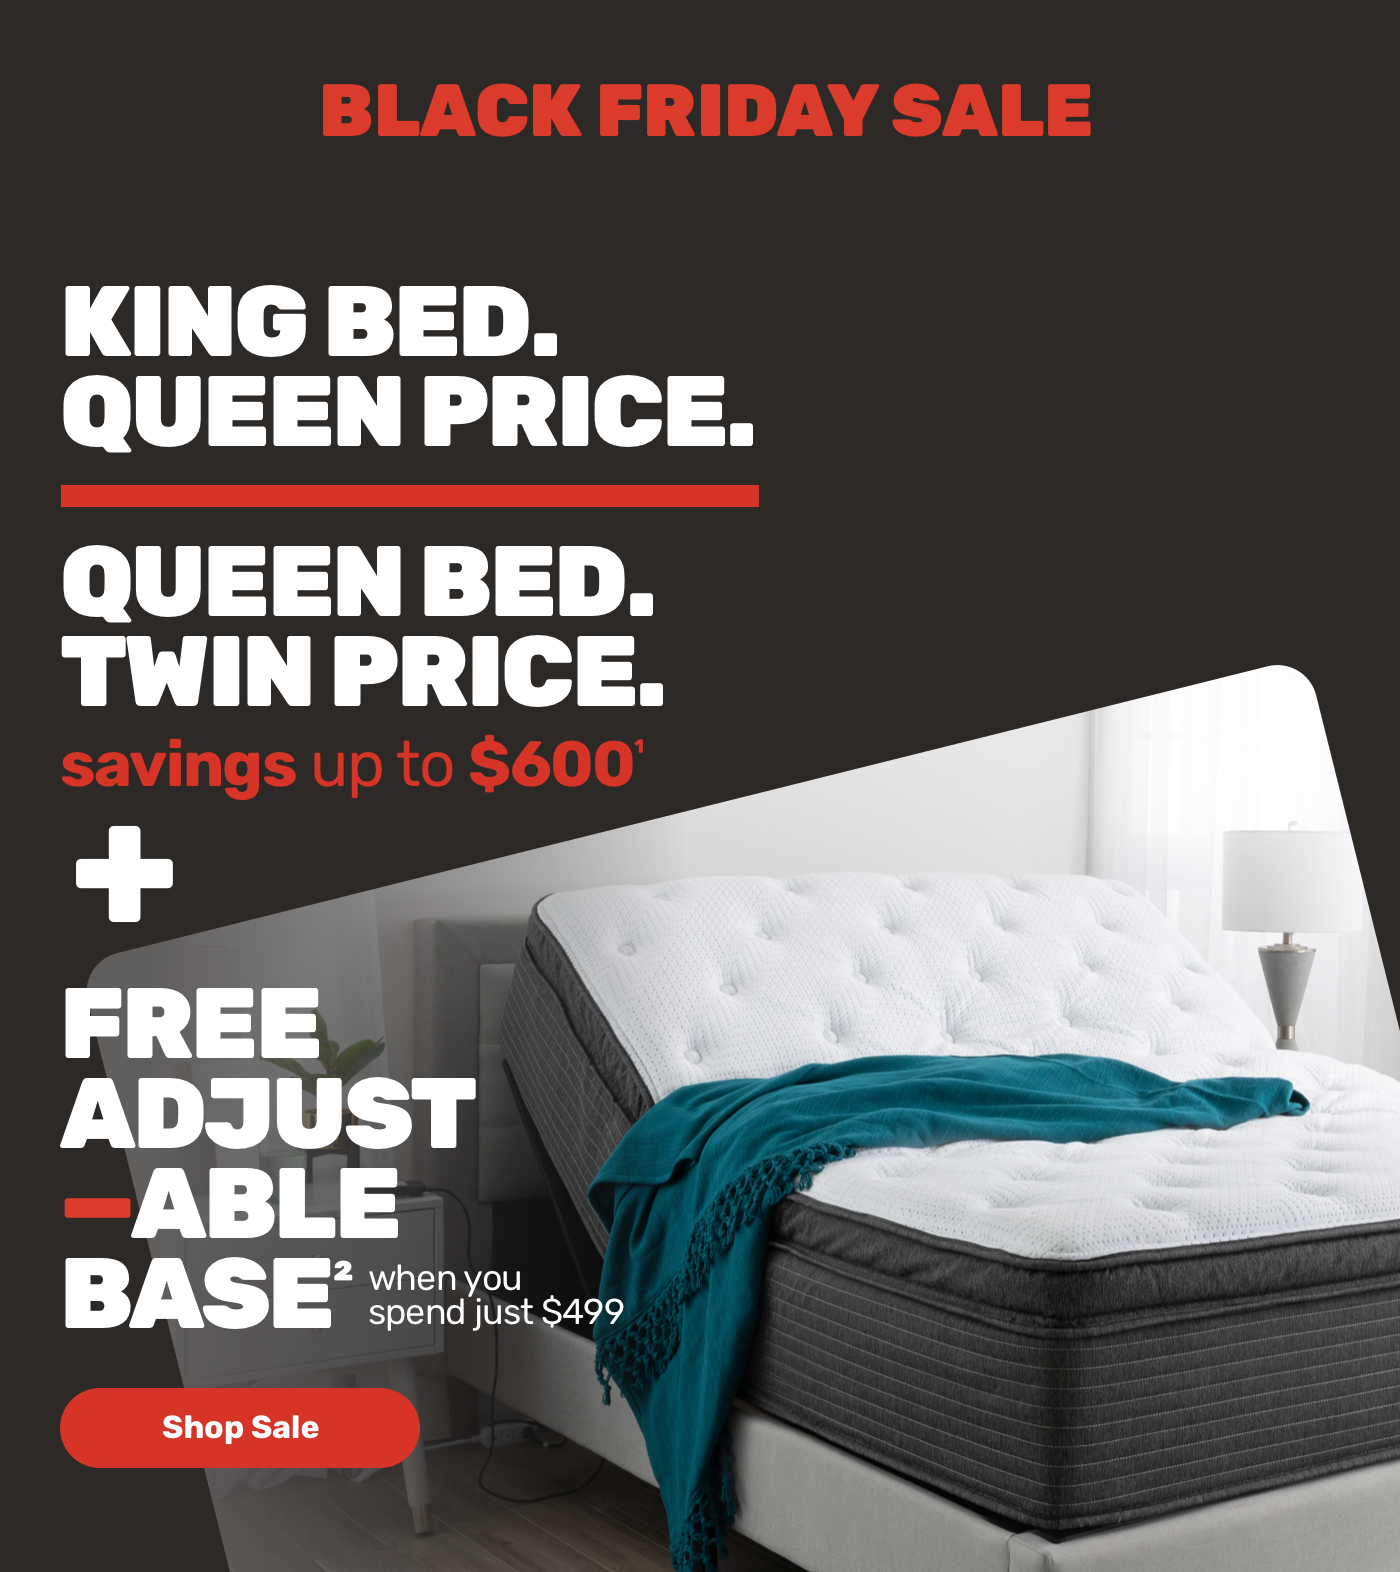 Black Friday Sale. King Bed. Queen Price. Queen Bed. Twin Price. Plus Free Adjustable Base. Shop Sale.